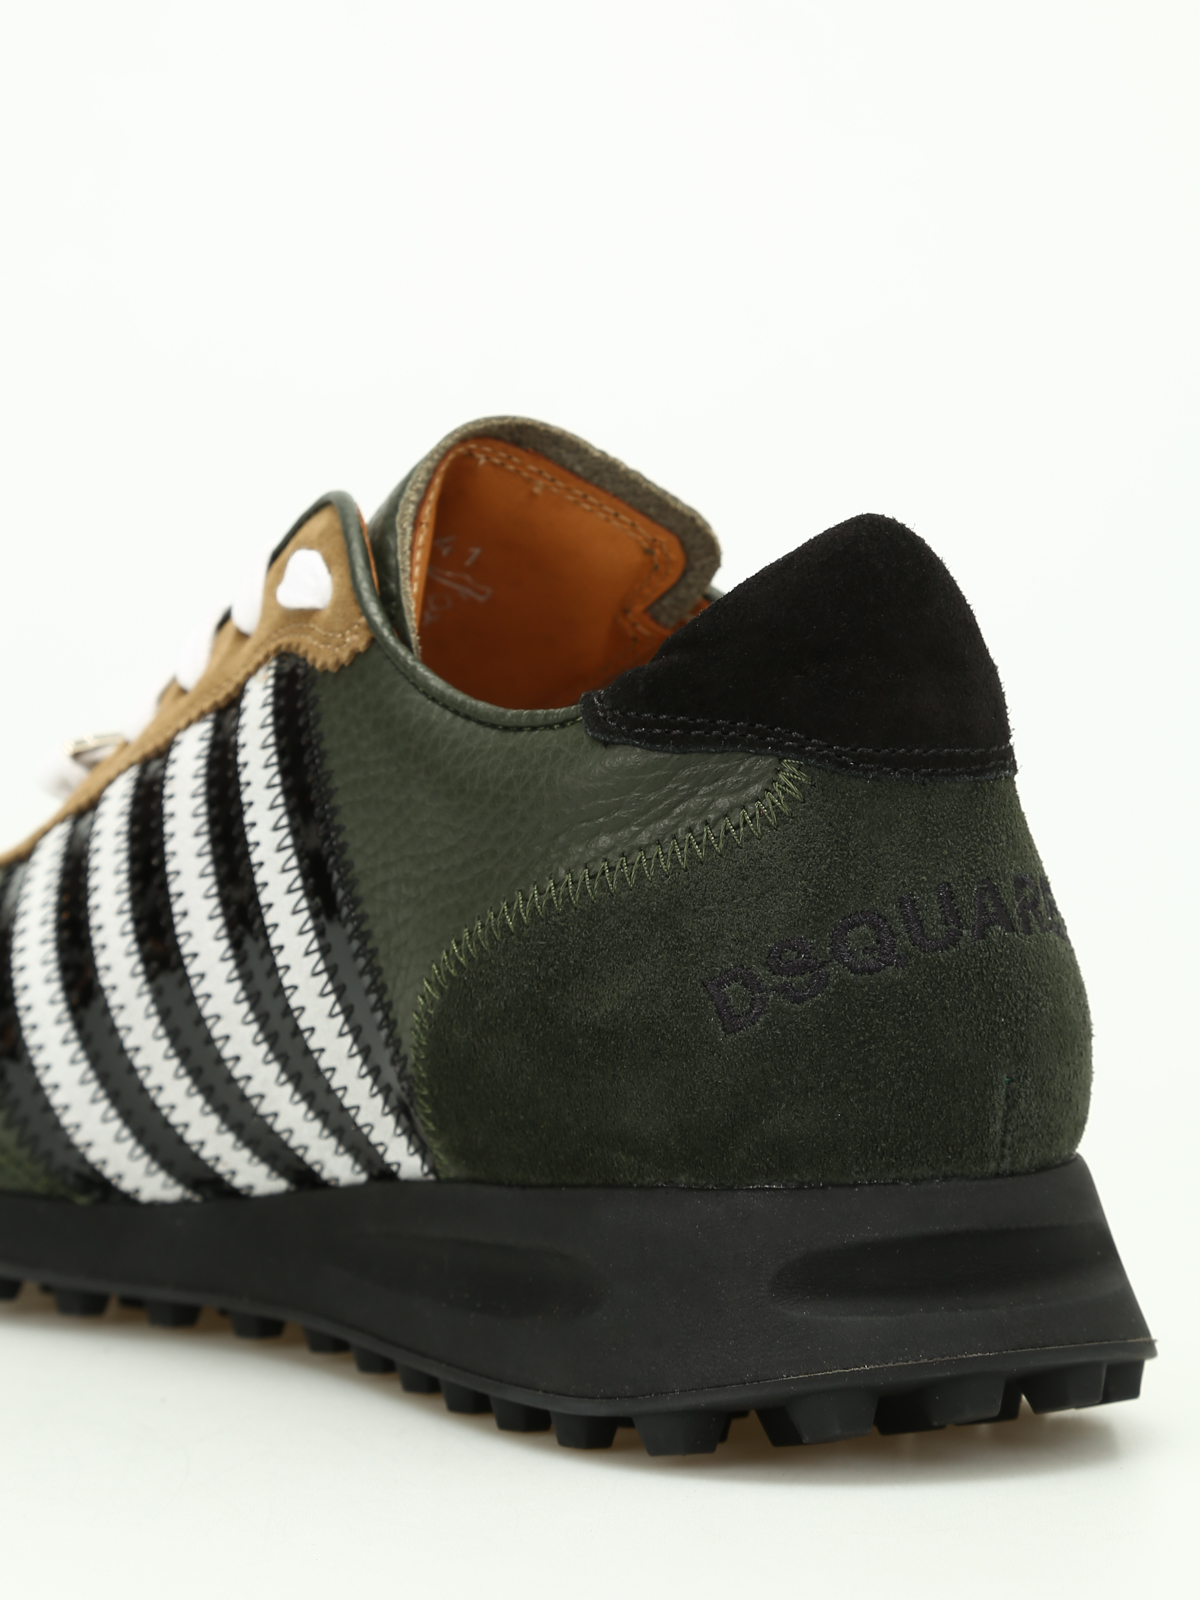 dsquared2 new runner hiking sneakers